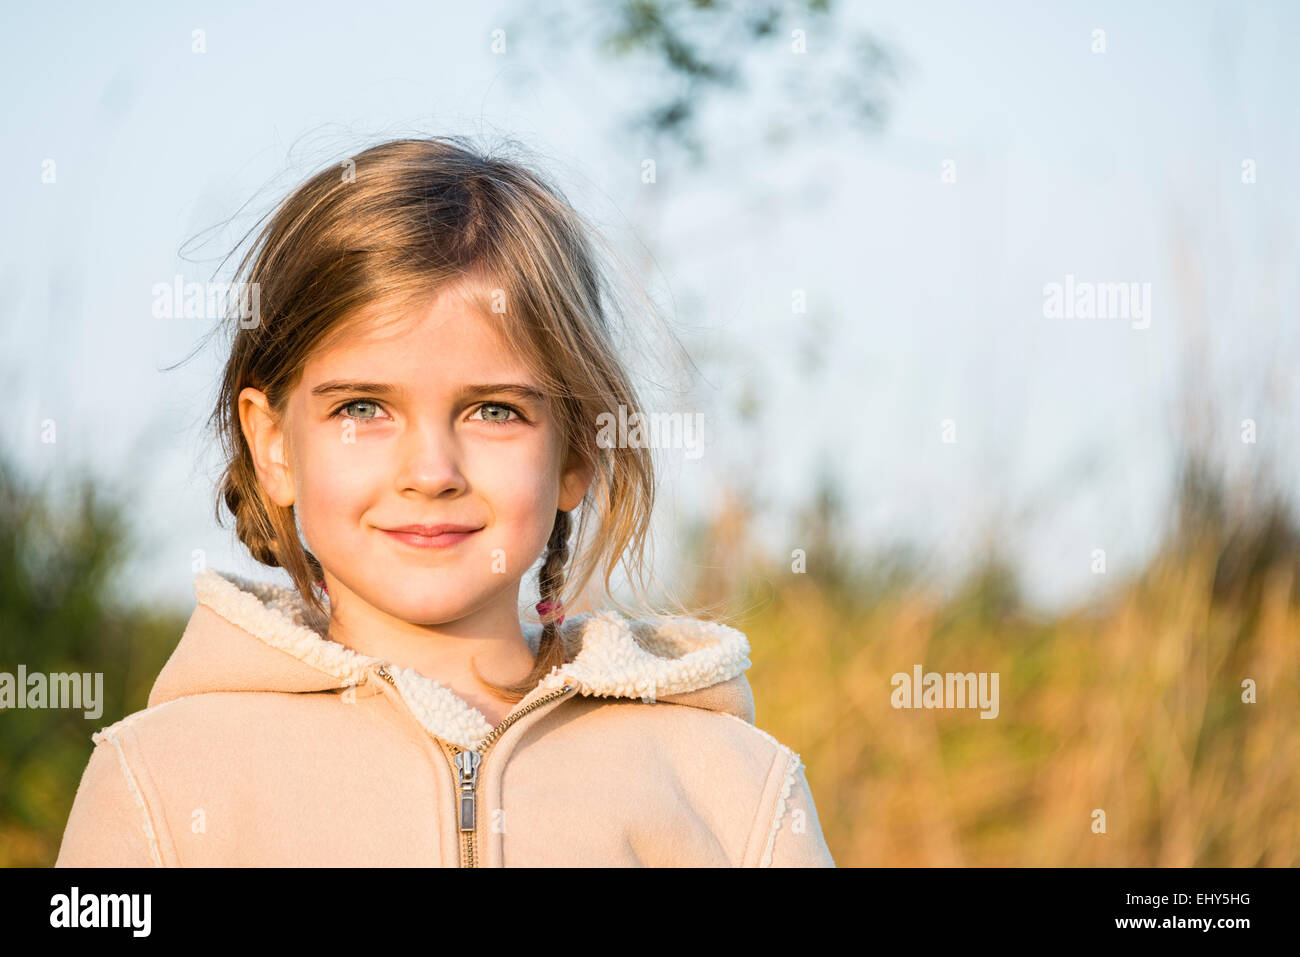 Portrait of girl with blond hair Stock Photo